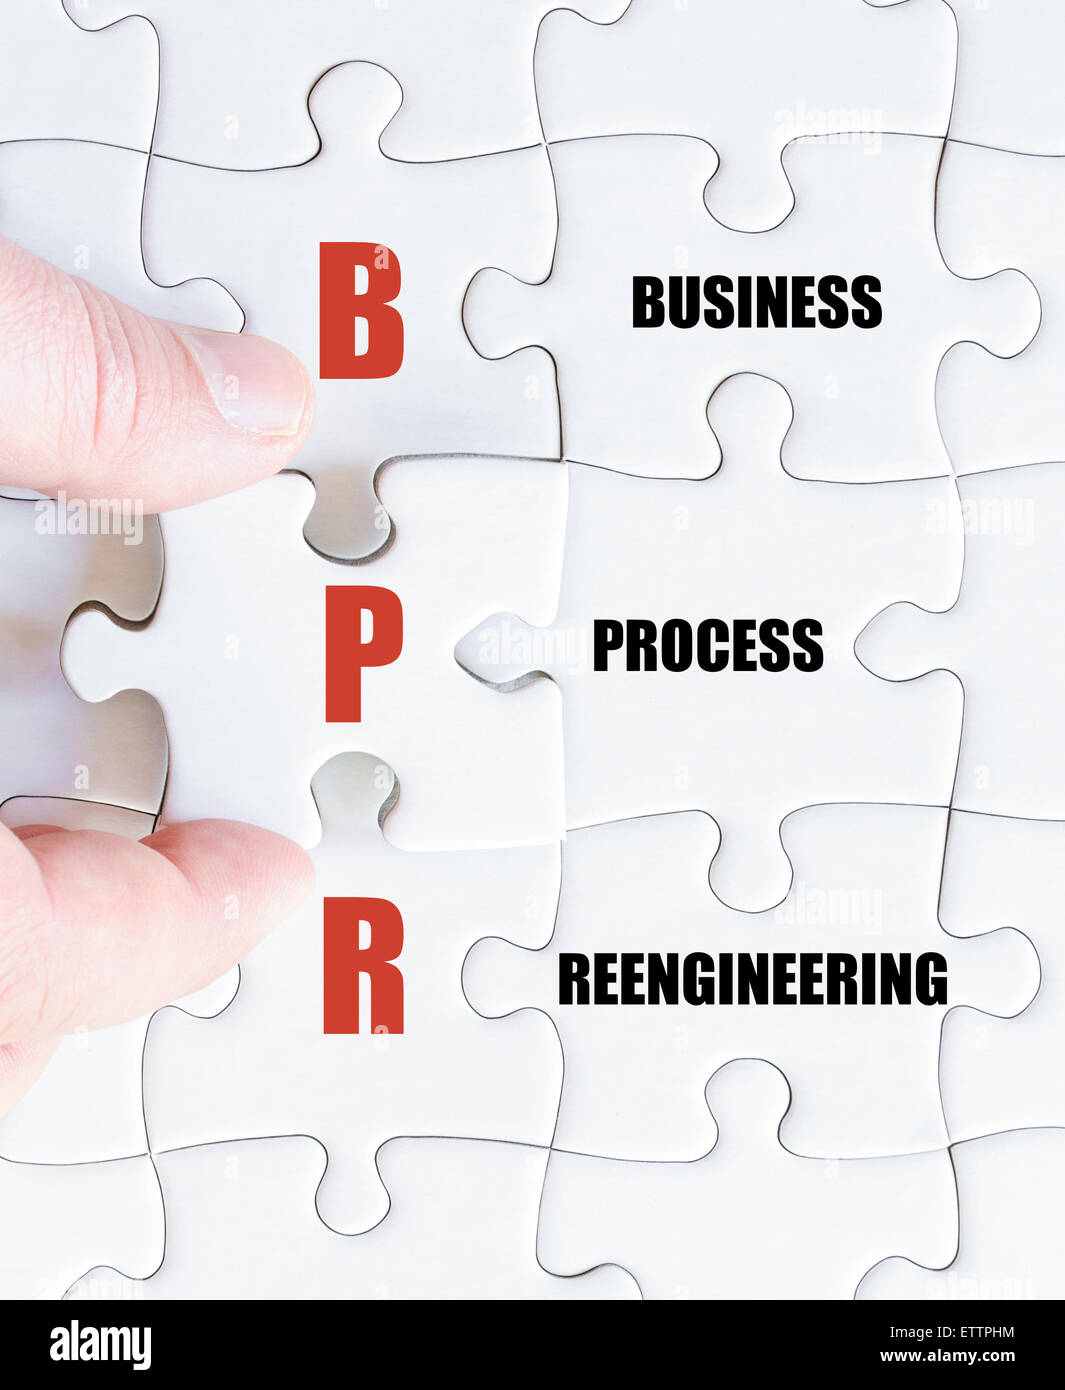 Concept image of Business Acronym BPR as Business Process Reengineering Stock Photo